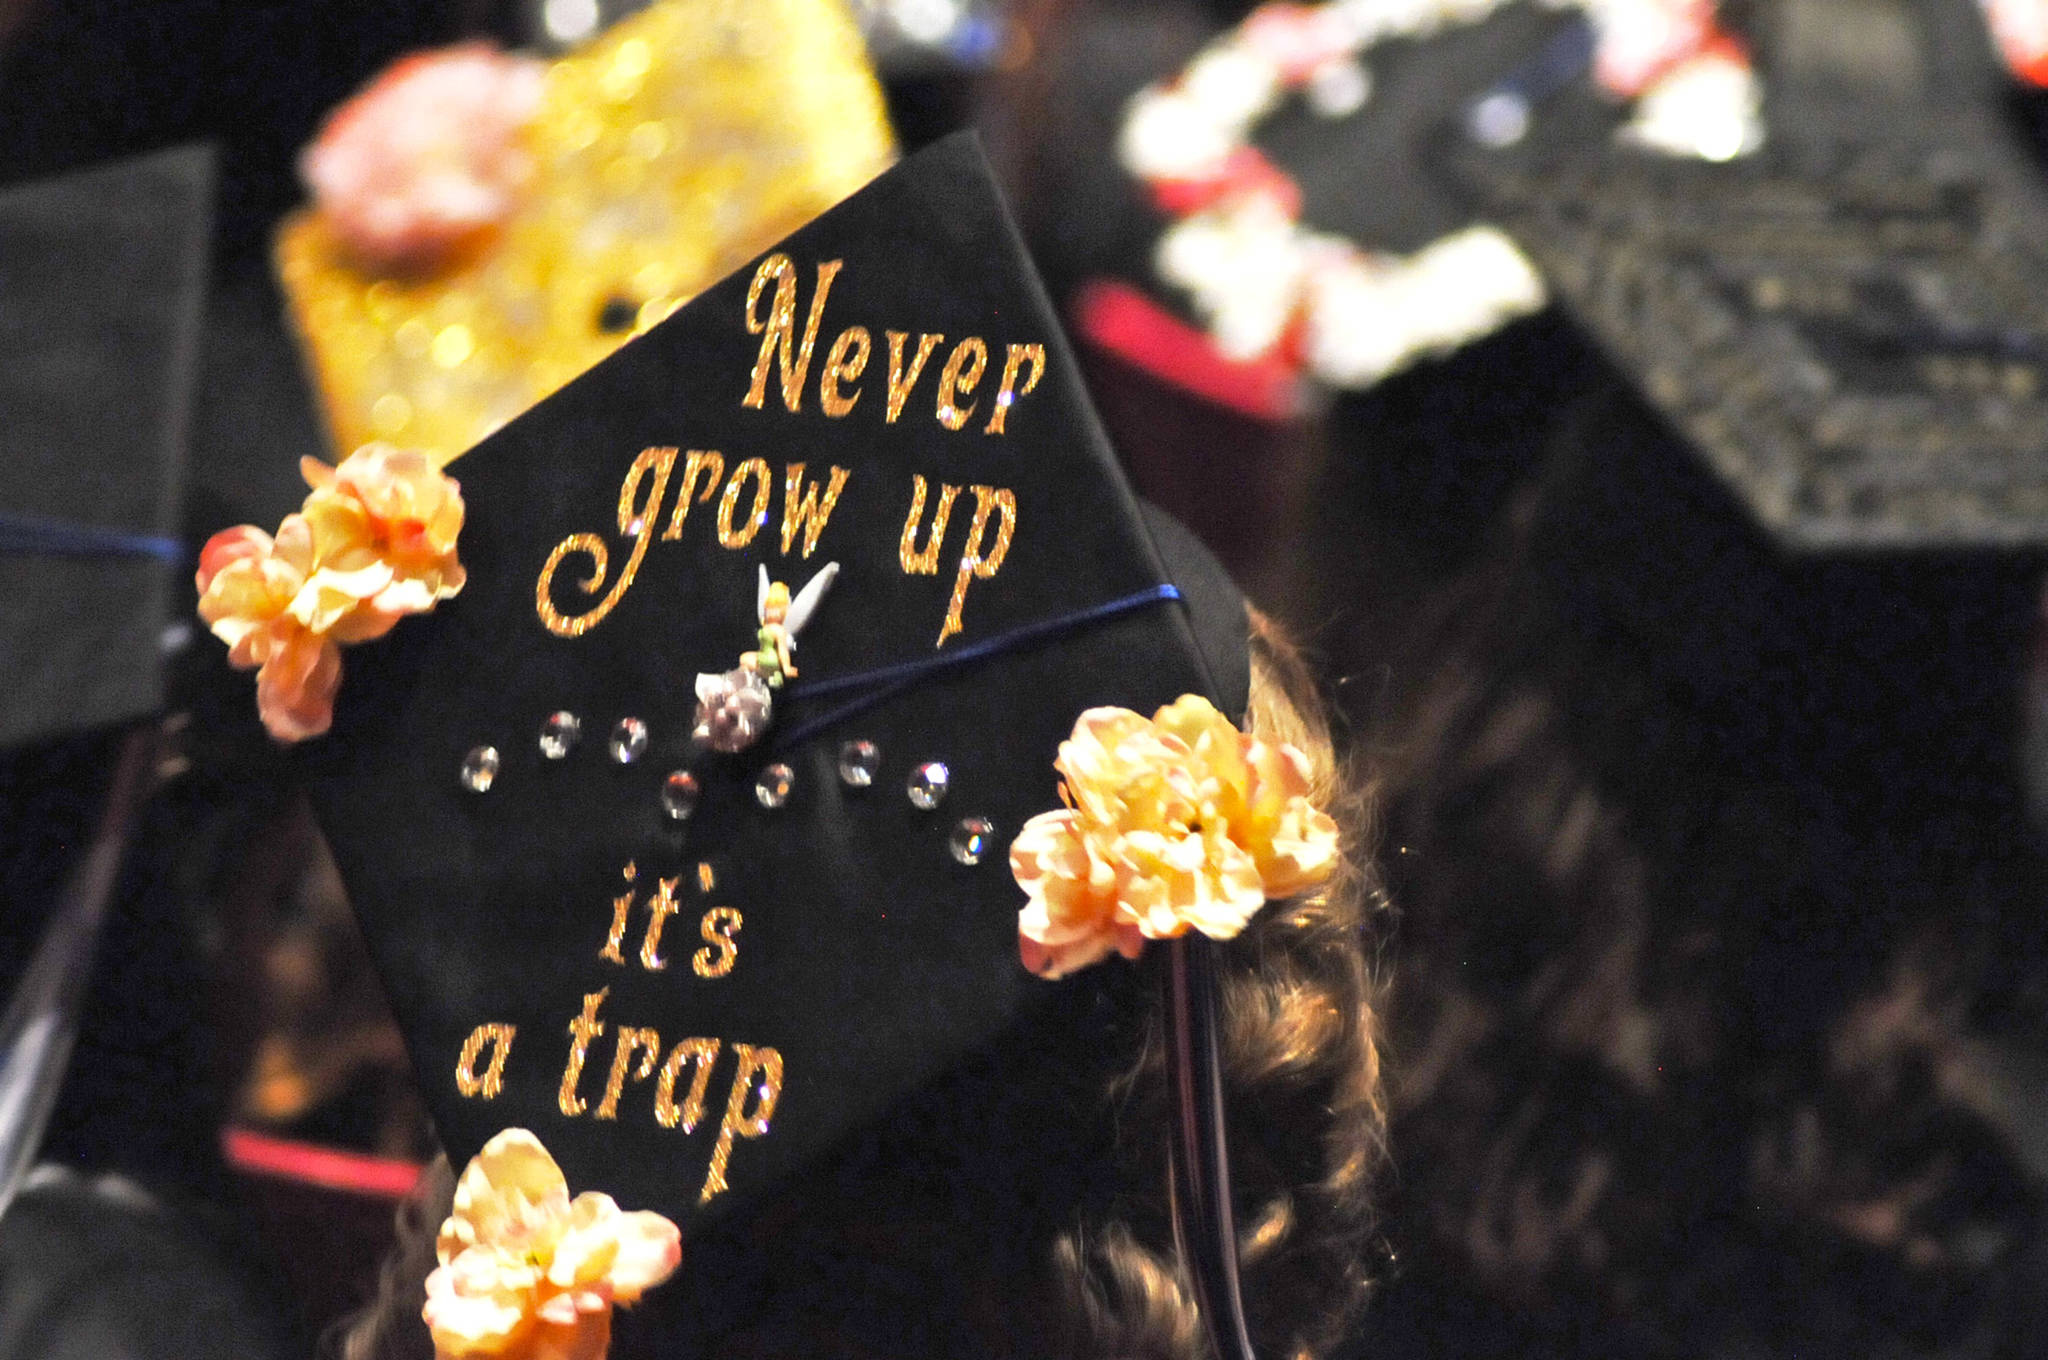 A Connections Homeschool graduate’s cap warns about the dangers of growing up at the program’s graduation ceremony on Thursday, May 24, 2018 in Soldotna, Alaska. The program, administered through the Kenai Peninsula Borough School District, graduated 58 students this year. (Photo by Elizabeth Earl/Peninsula Clarion)